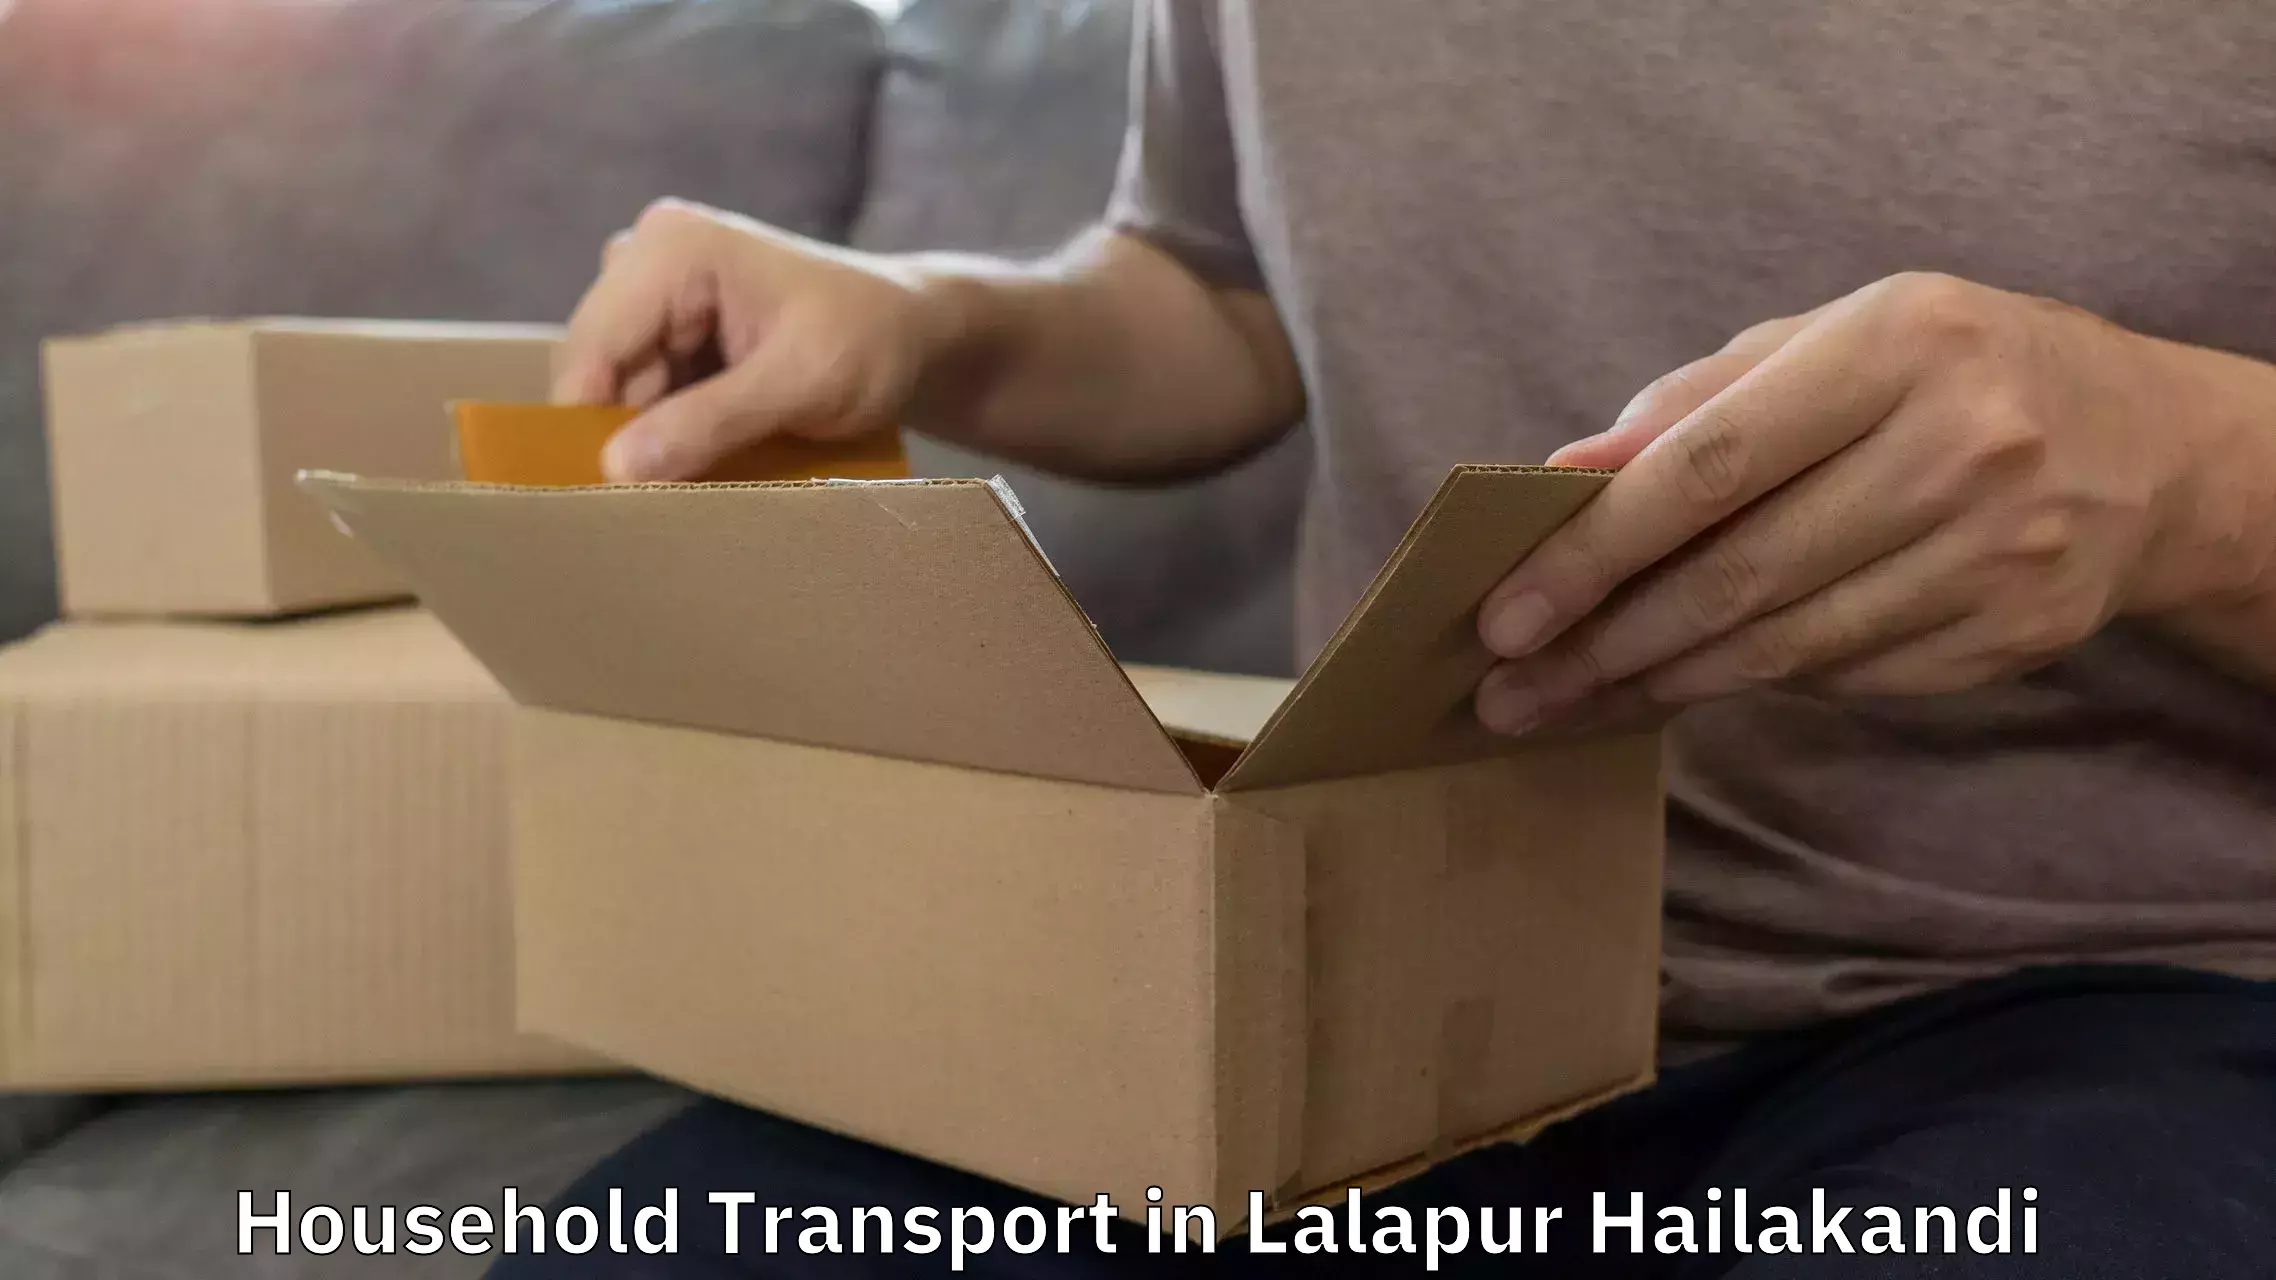 Reliable movers in Lalapur Hailakandi